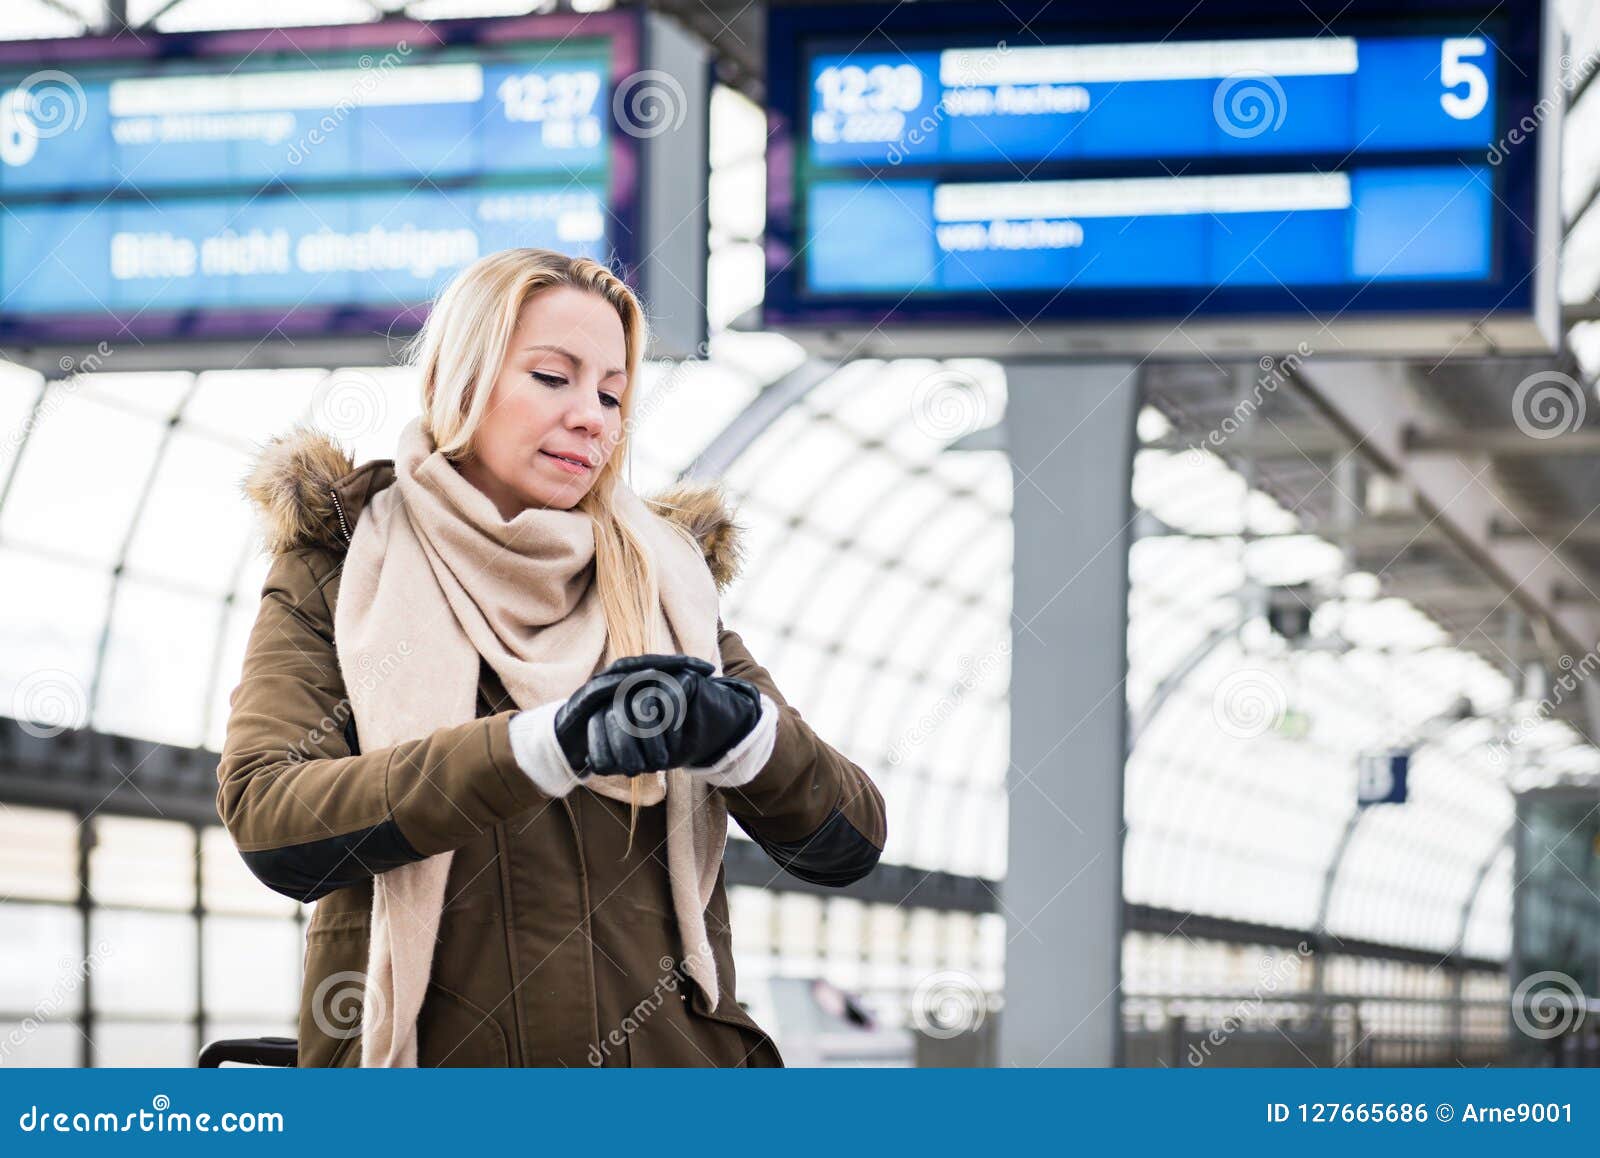 woman looking at wristwatch in train station as her train has a delay